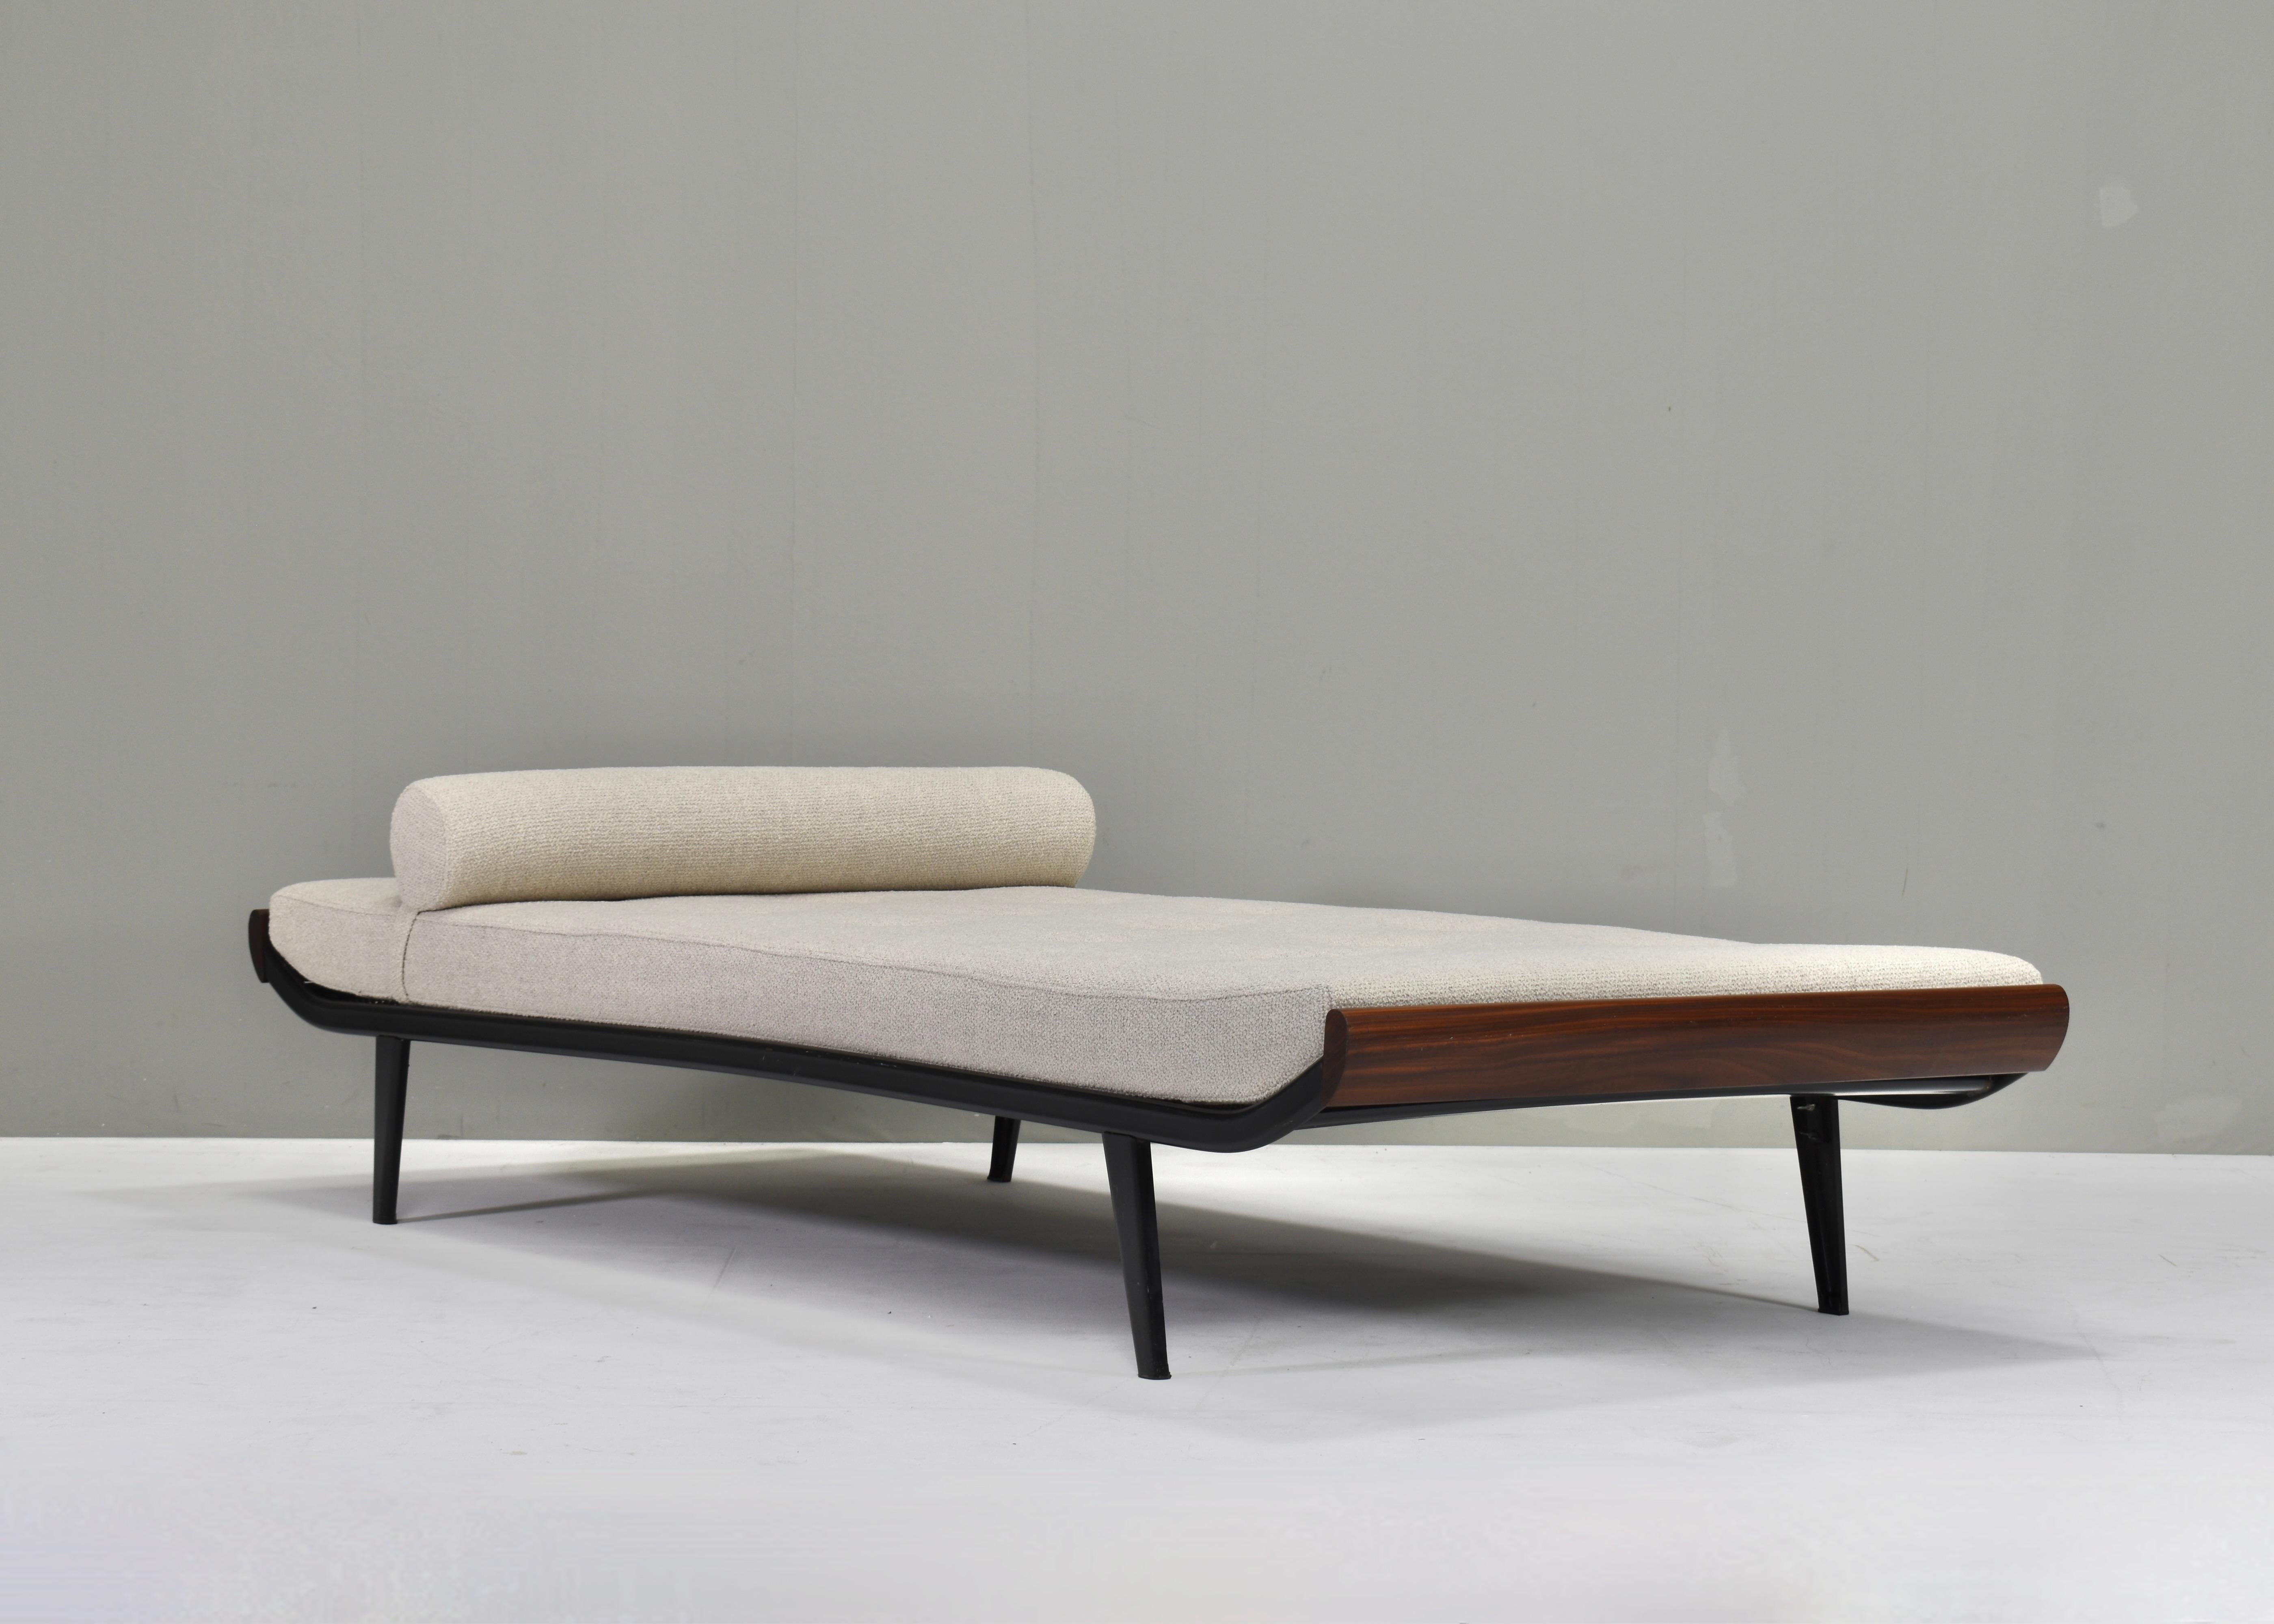 New upholstered daybed by Dick Cordemeijer for Auping, Netherlands – 1953.
The Cleopatra daybed has a new mattress and bouclé beige creme fabric by De Ploegstof model Monza.
In good condition with new mattress and upholstery. The metal frame shows